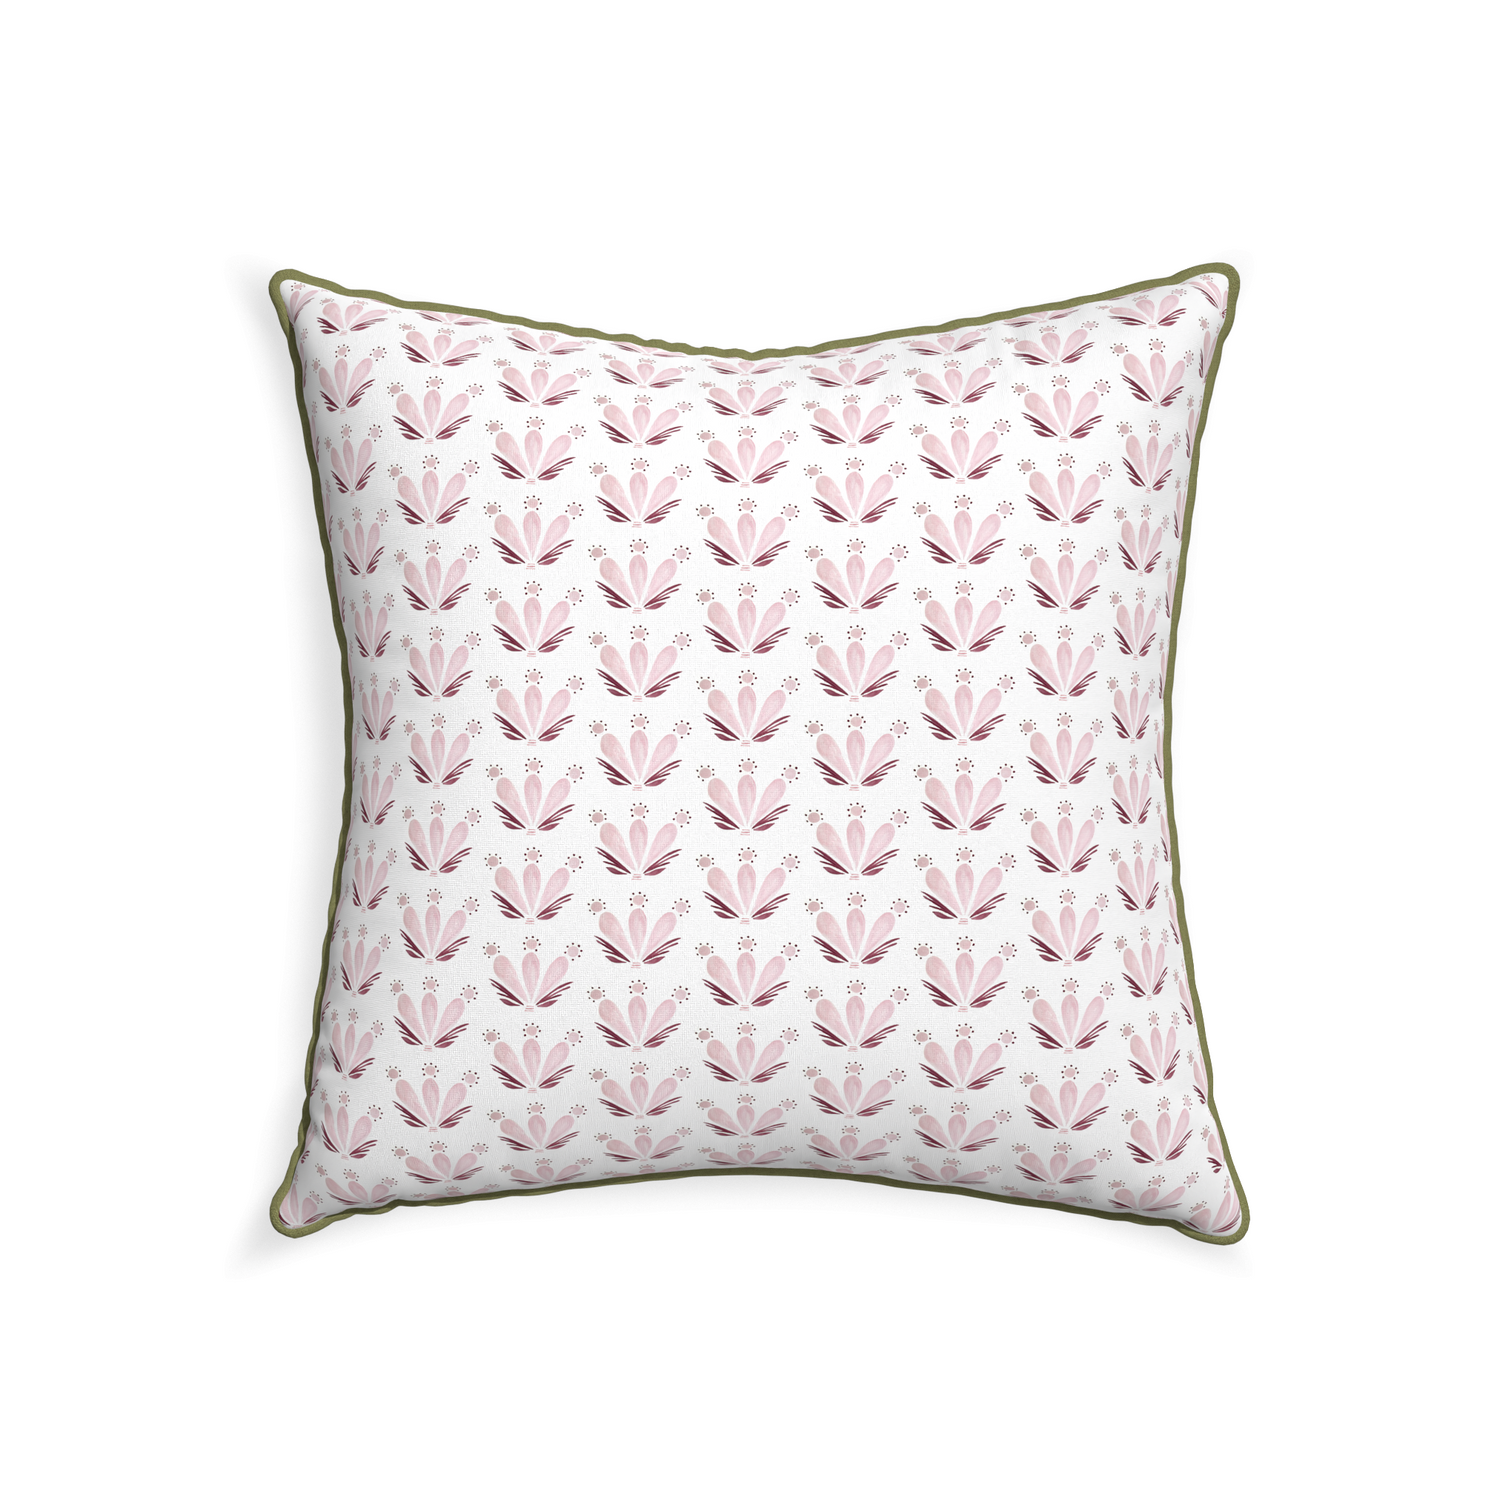 22-square serena pink custom pillow with moss piping on white background